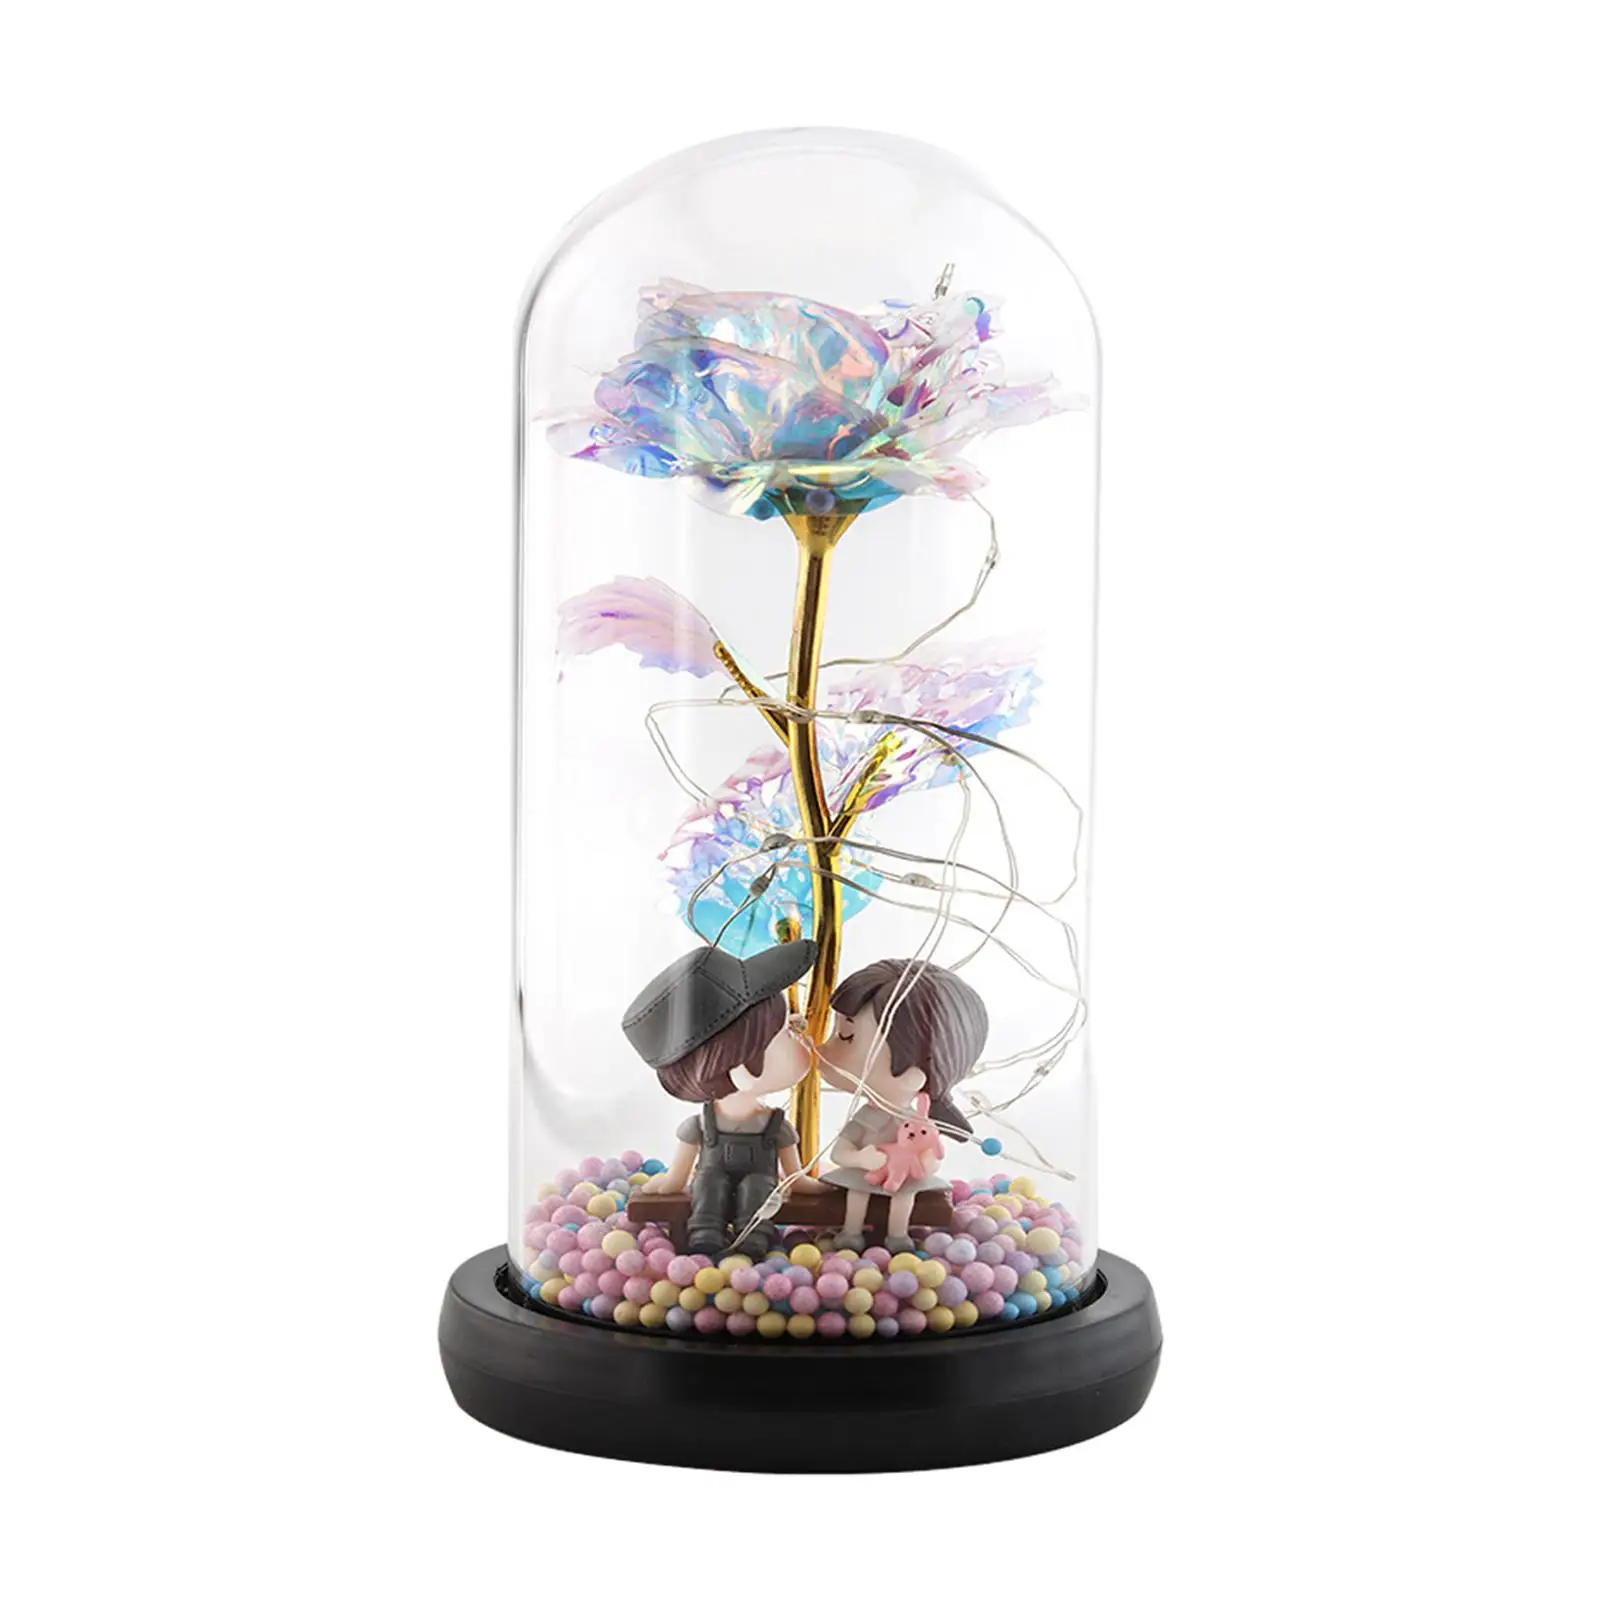 Rose Flower Gifts for Women i Love You Gifts for Her Anniversary Bedside Night Light Eternal Flower Light up Rose in Glass Dome